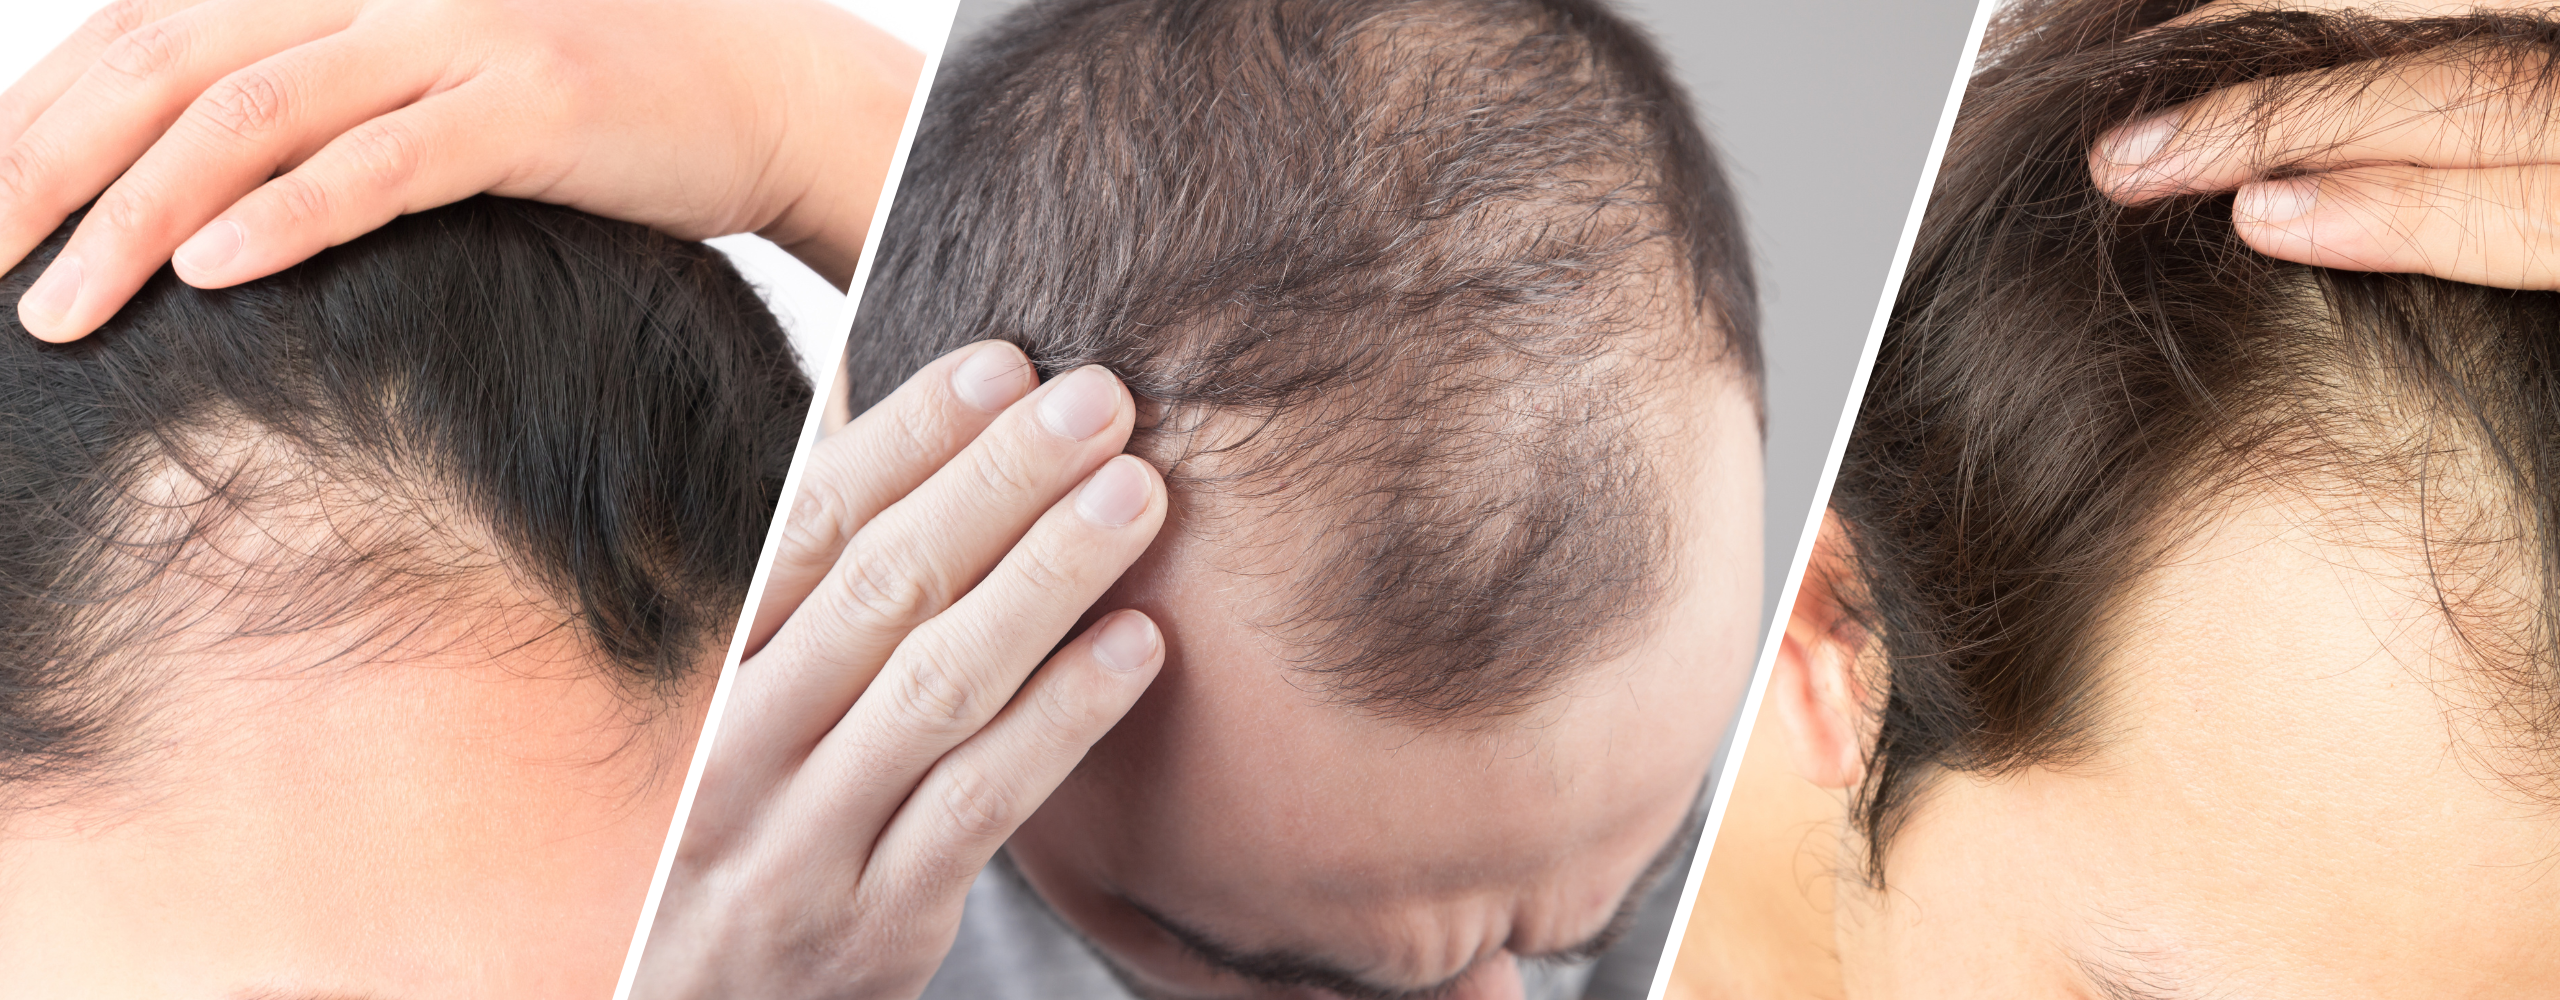 laser treatment for hair growth